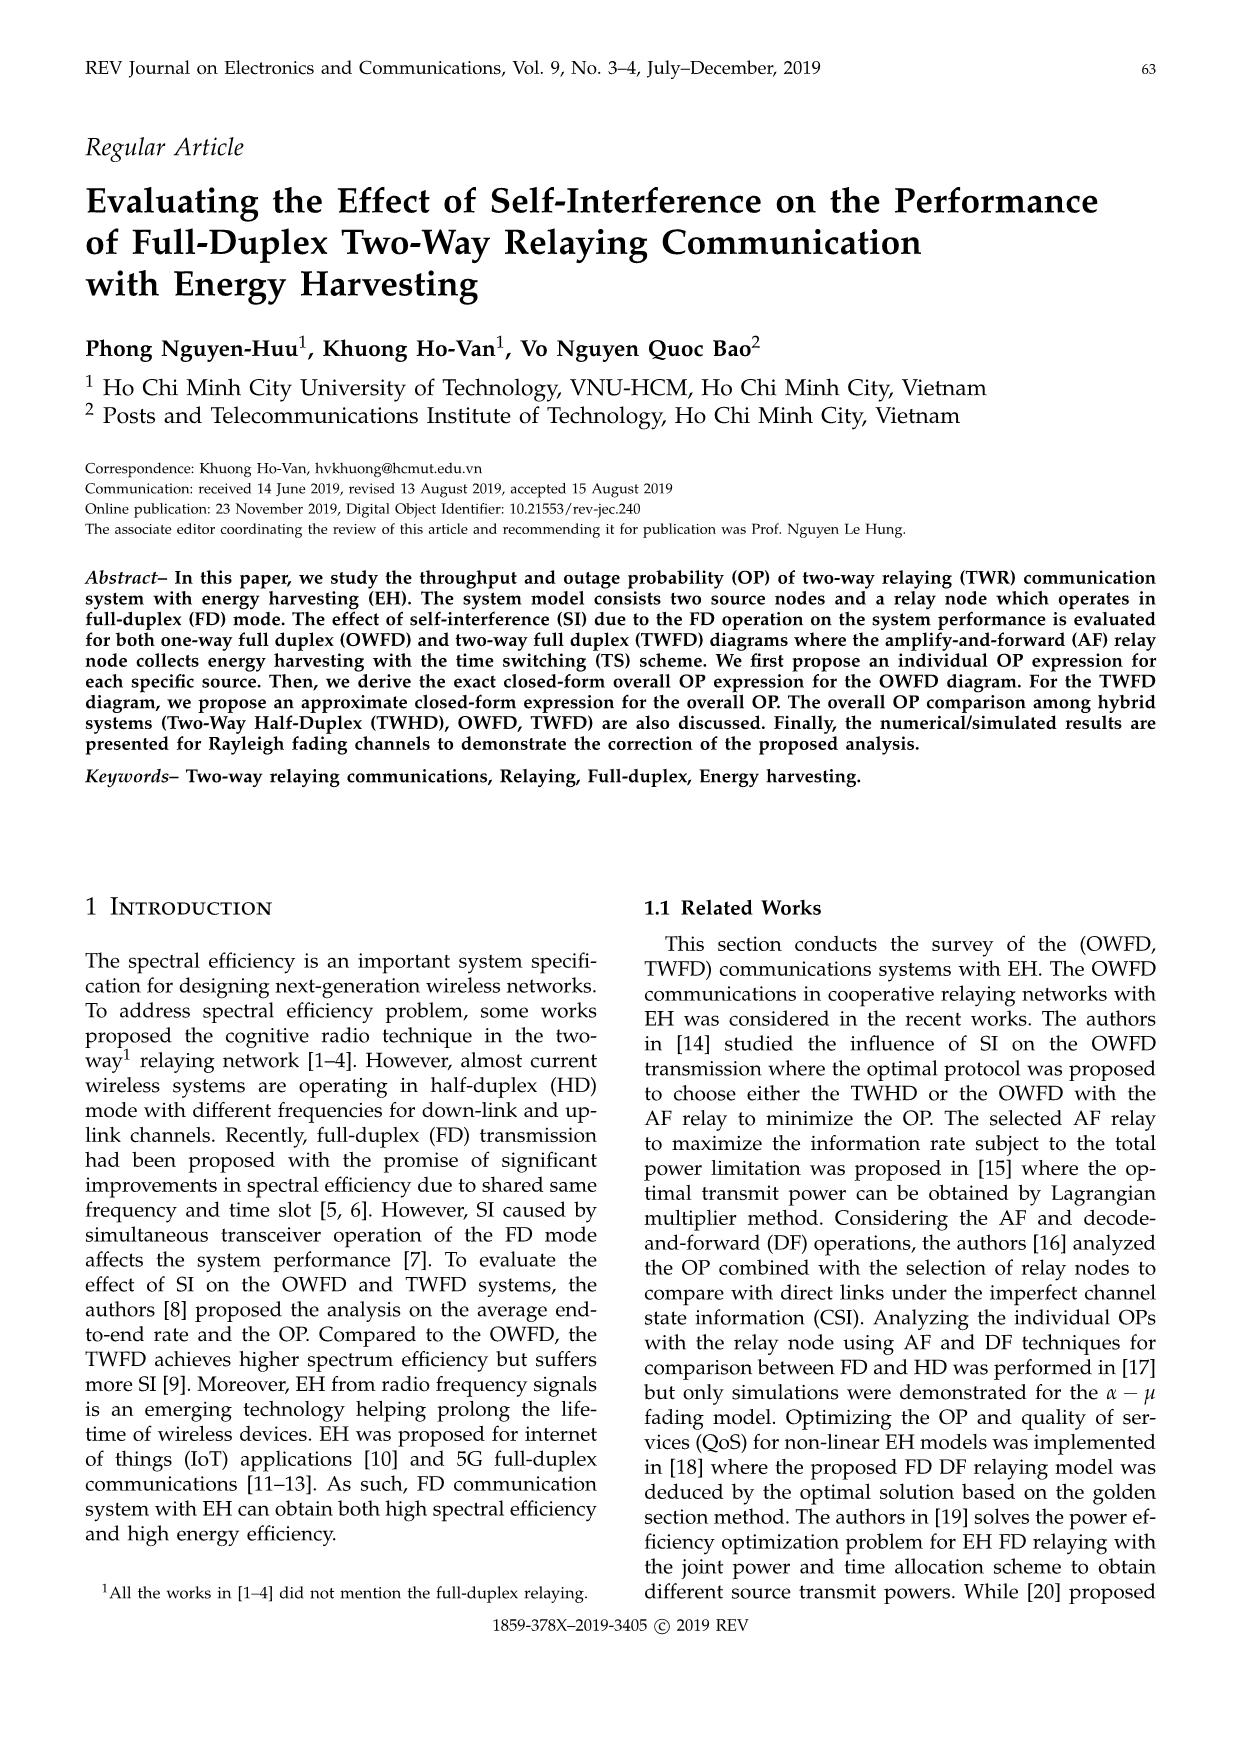 Evaluating the effect of self-Interference on the performance of full-duplex two-way relaying communication with energy harvesting trang 1